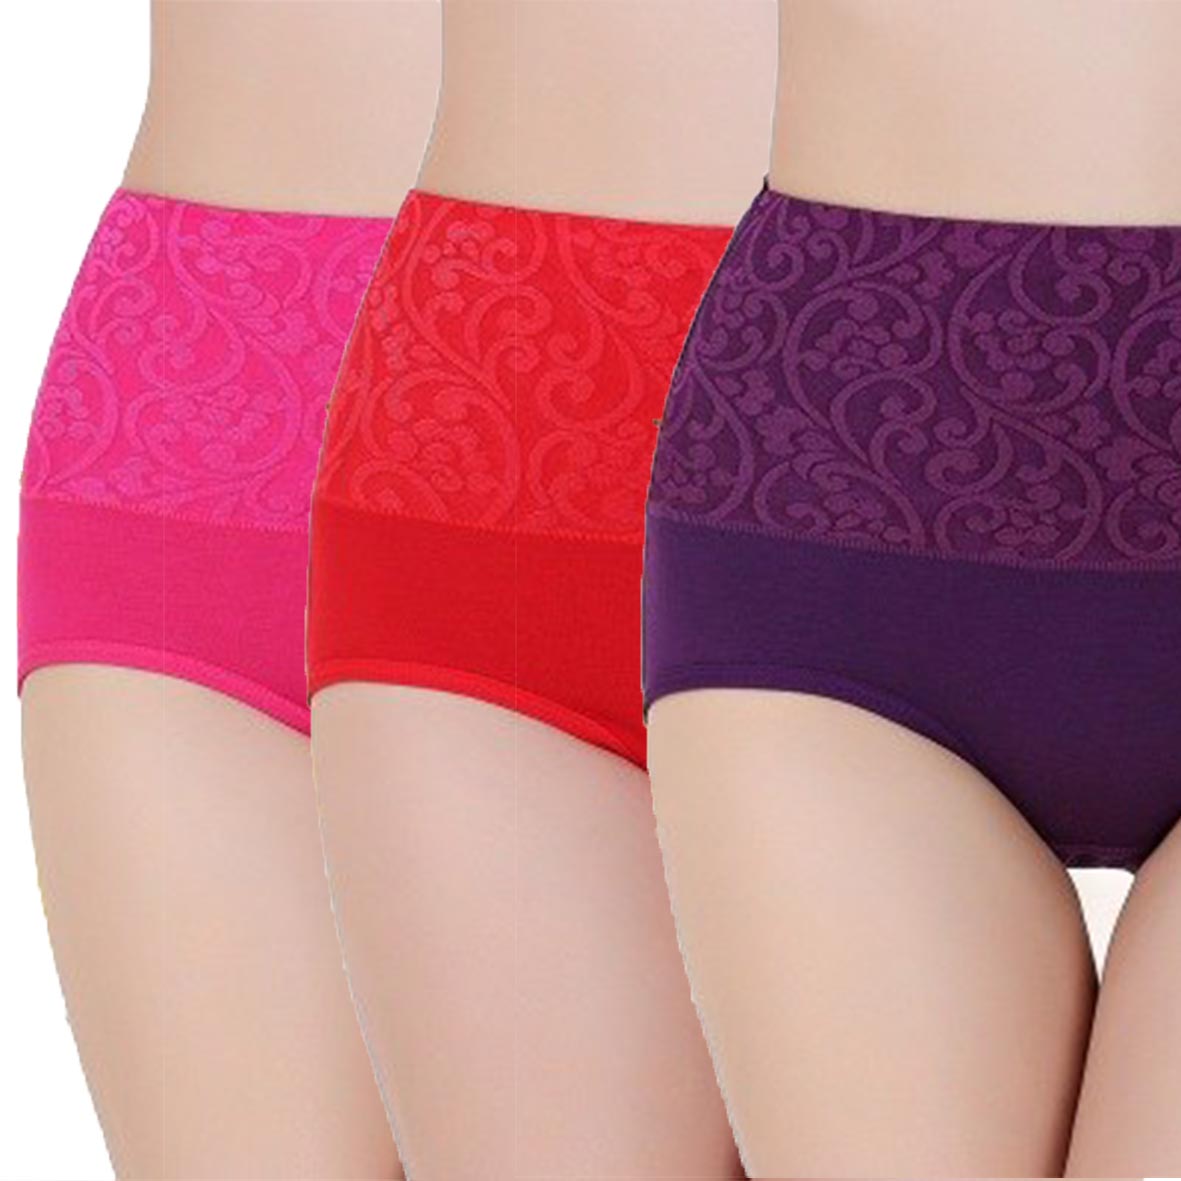 SENSITRA Sexy Women Lace Panty/Underwear – High Waist Full Coverage Ladies  Briefs to Hide Muffin Top and Side Bulges Assorted